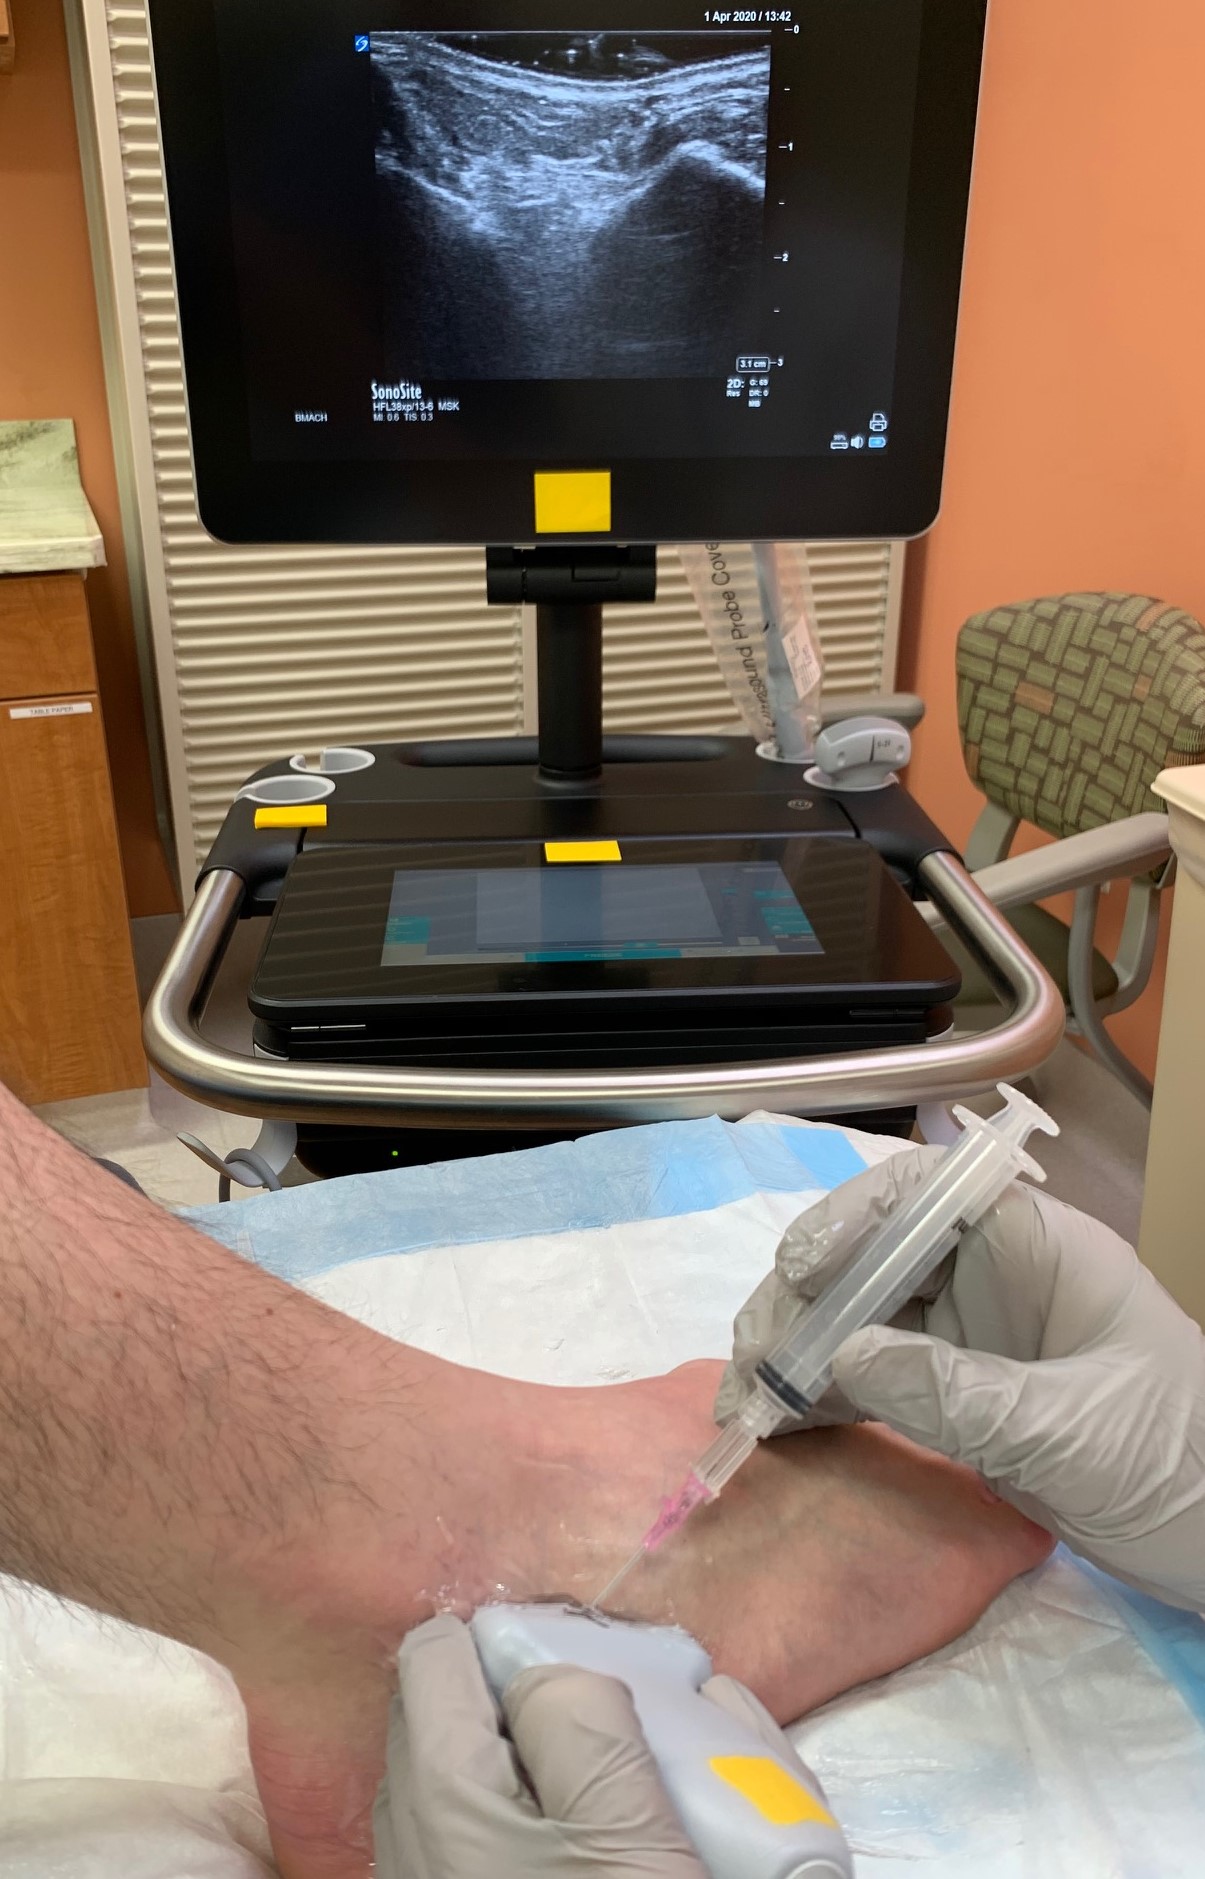 Demonstration of positioning and location for access to subtalar ankle joint with ultrasound guidance.  Ultrasound monitor demonstrates desired landmarks of Talus (left) and Calcaneus (right).